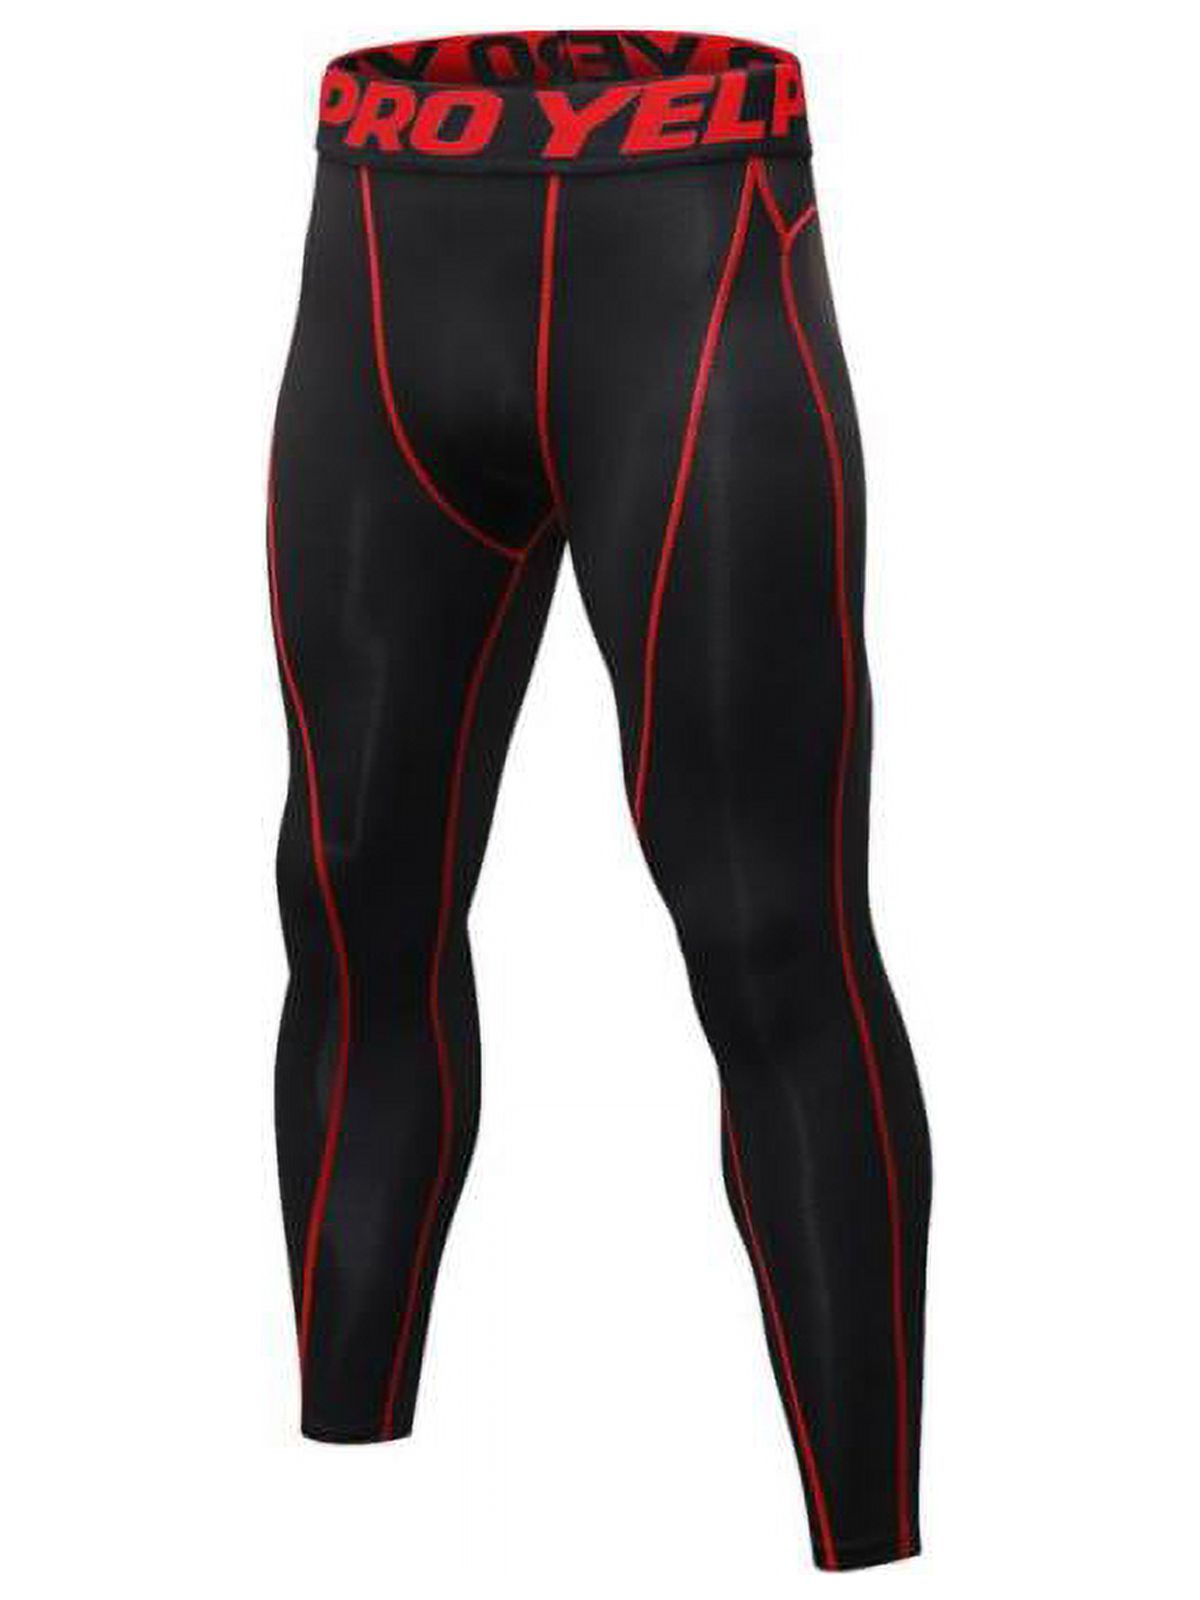 Men's Compression Pants Workout Leggings for Gym, Basketball, Cycling,  Yoga, Hiking Quick-drying Pants Athletic Base Layer Pants/Thermal  Underwear for Men, Black Red, XL